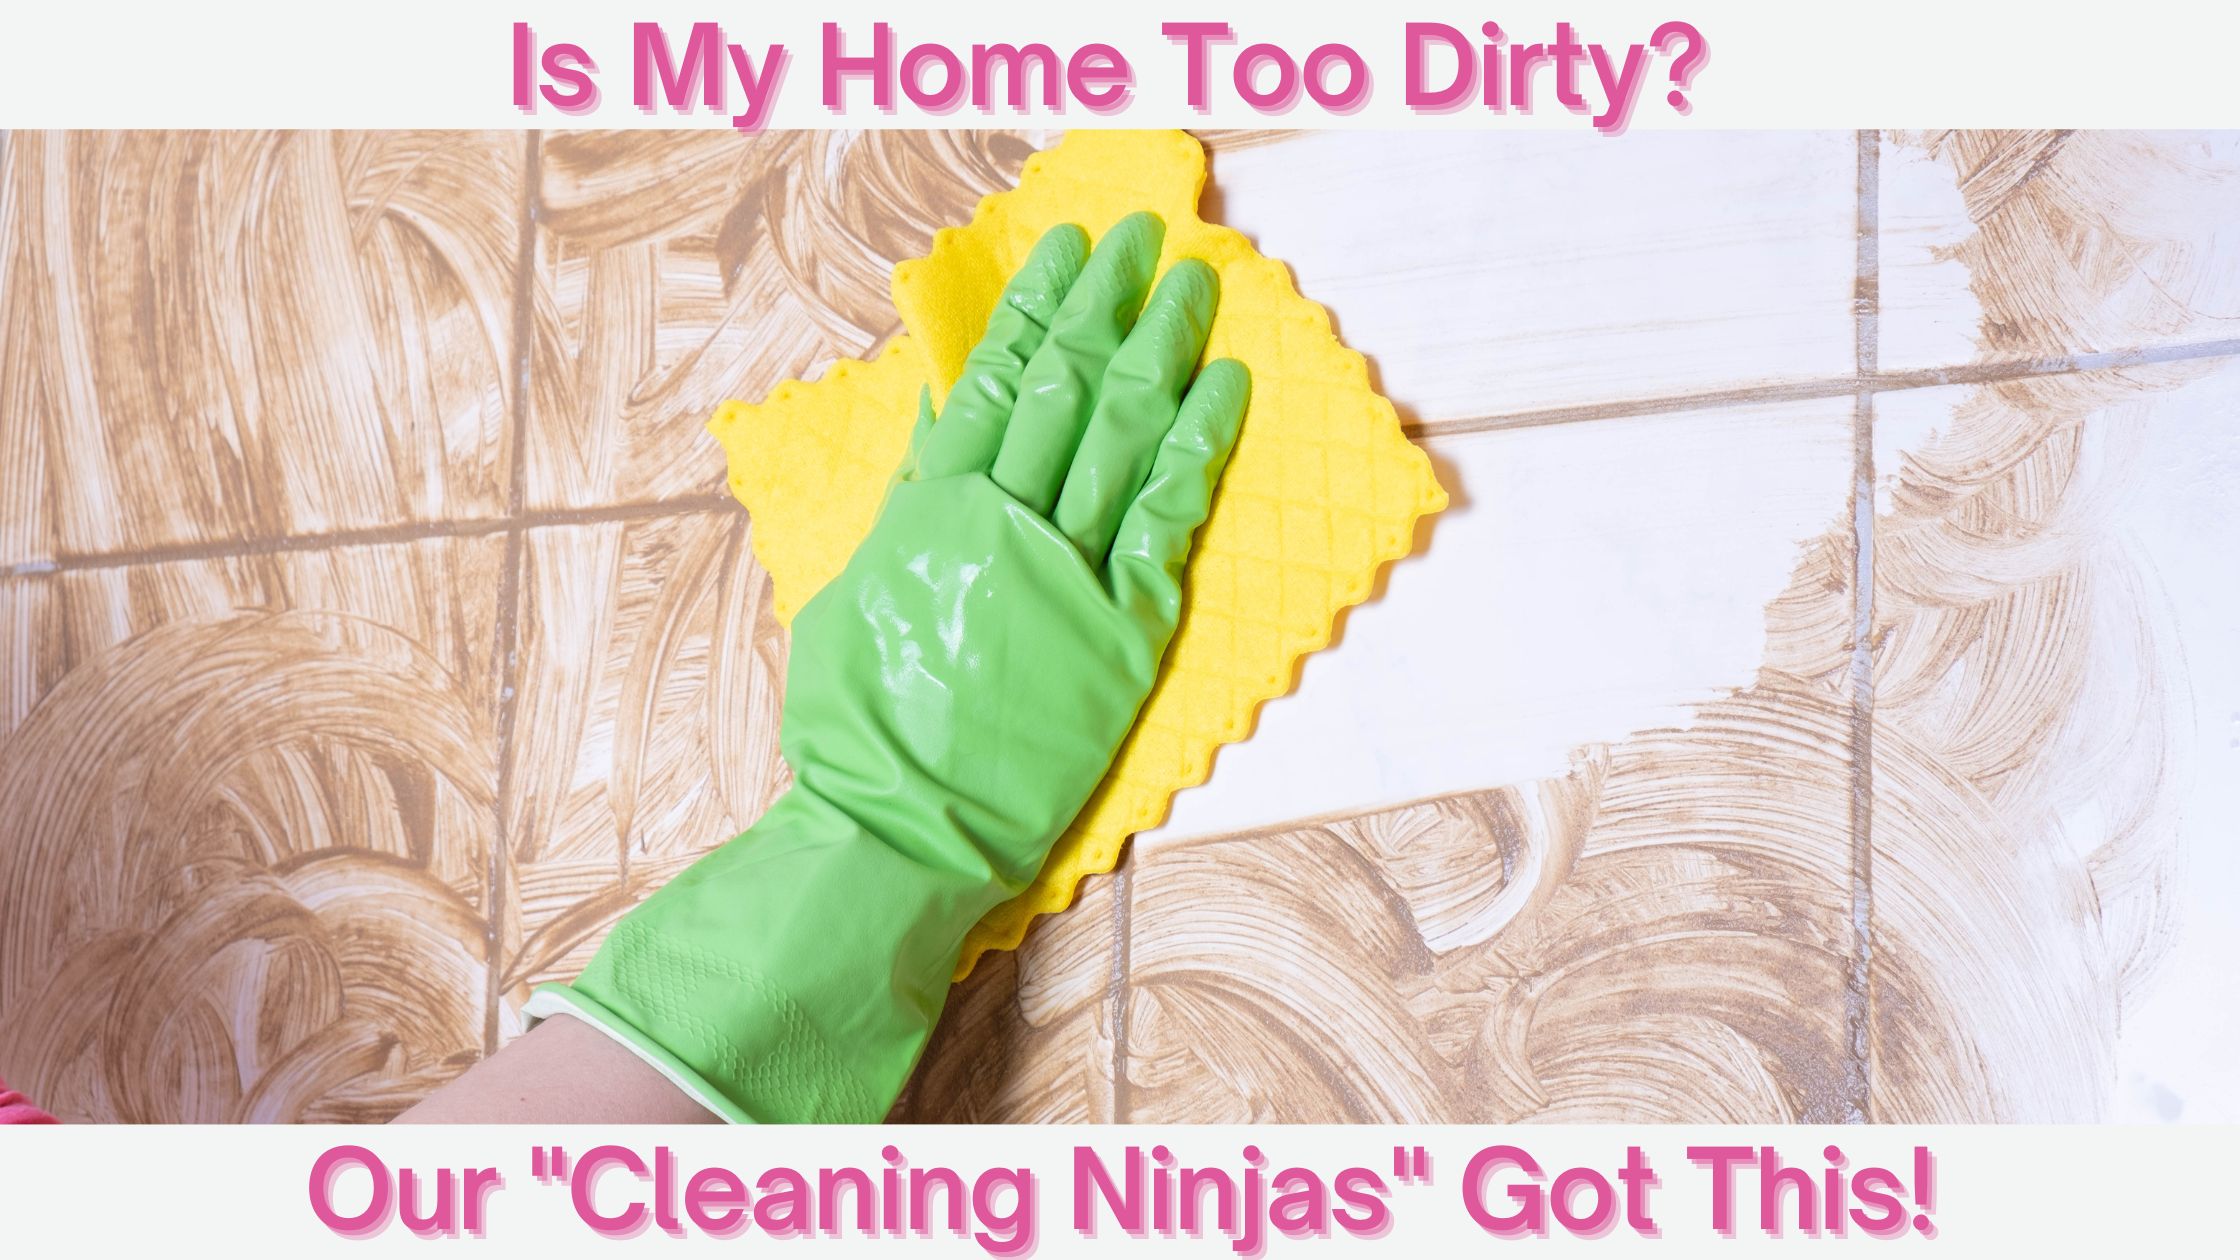 Cleaning a Dirty Home